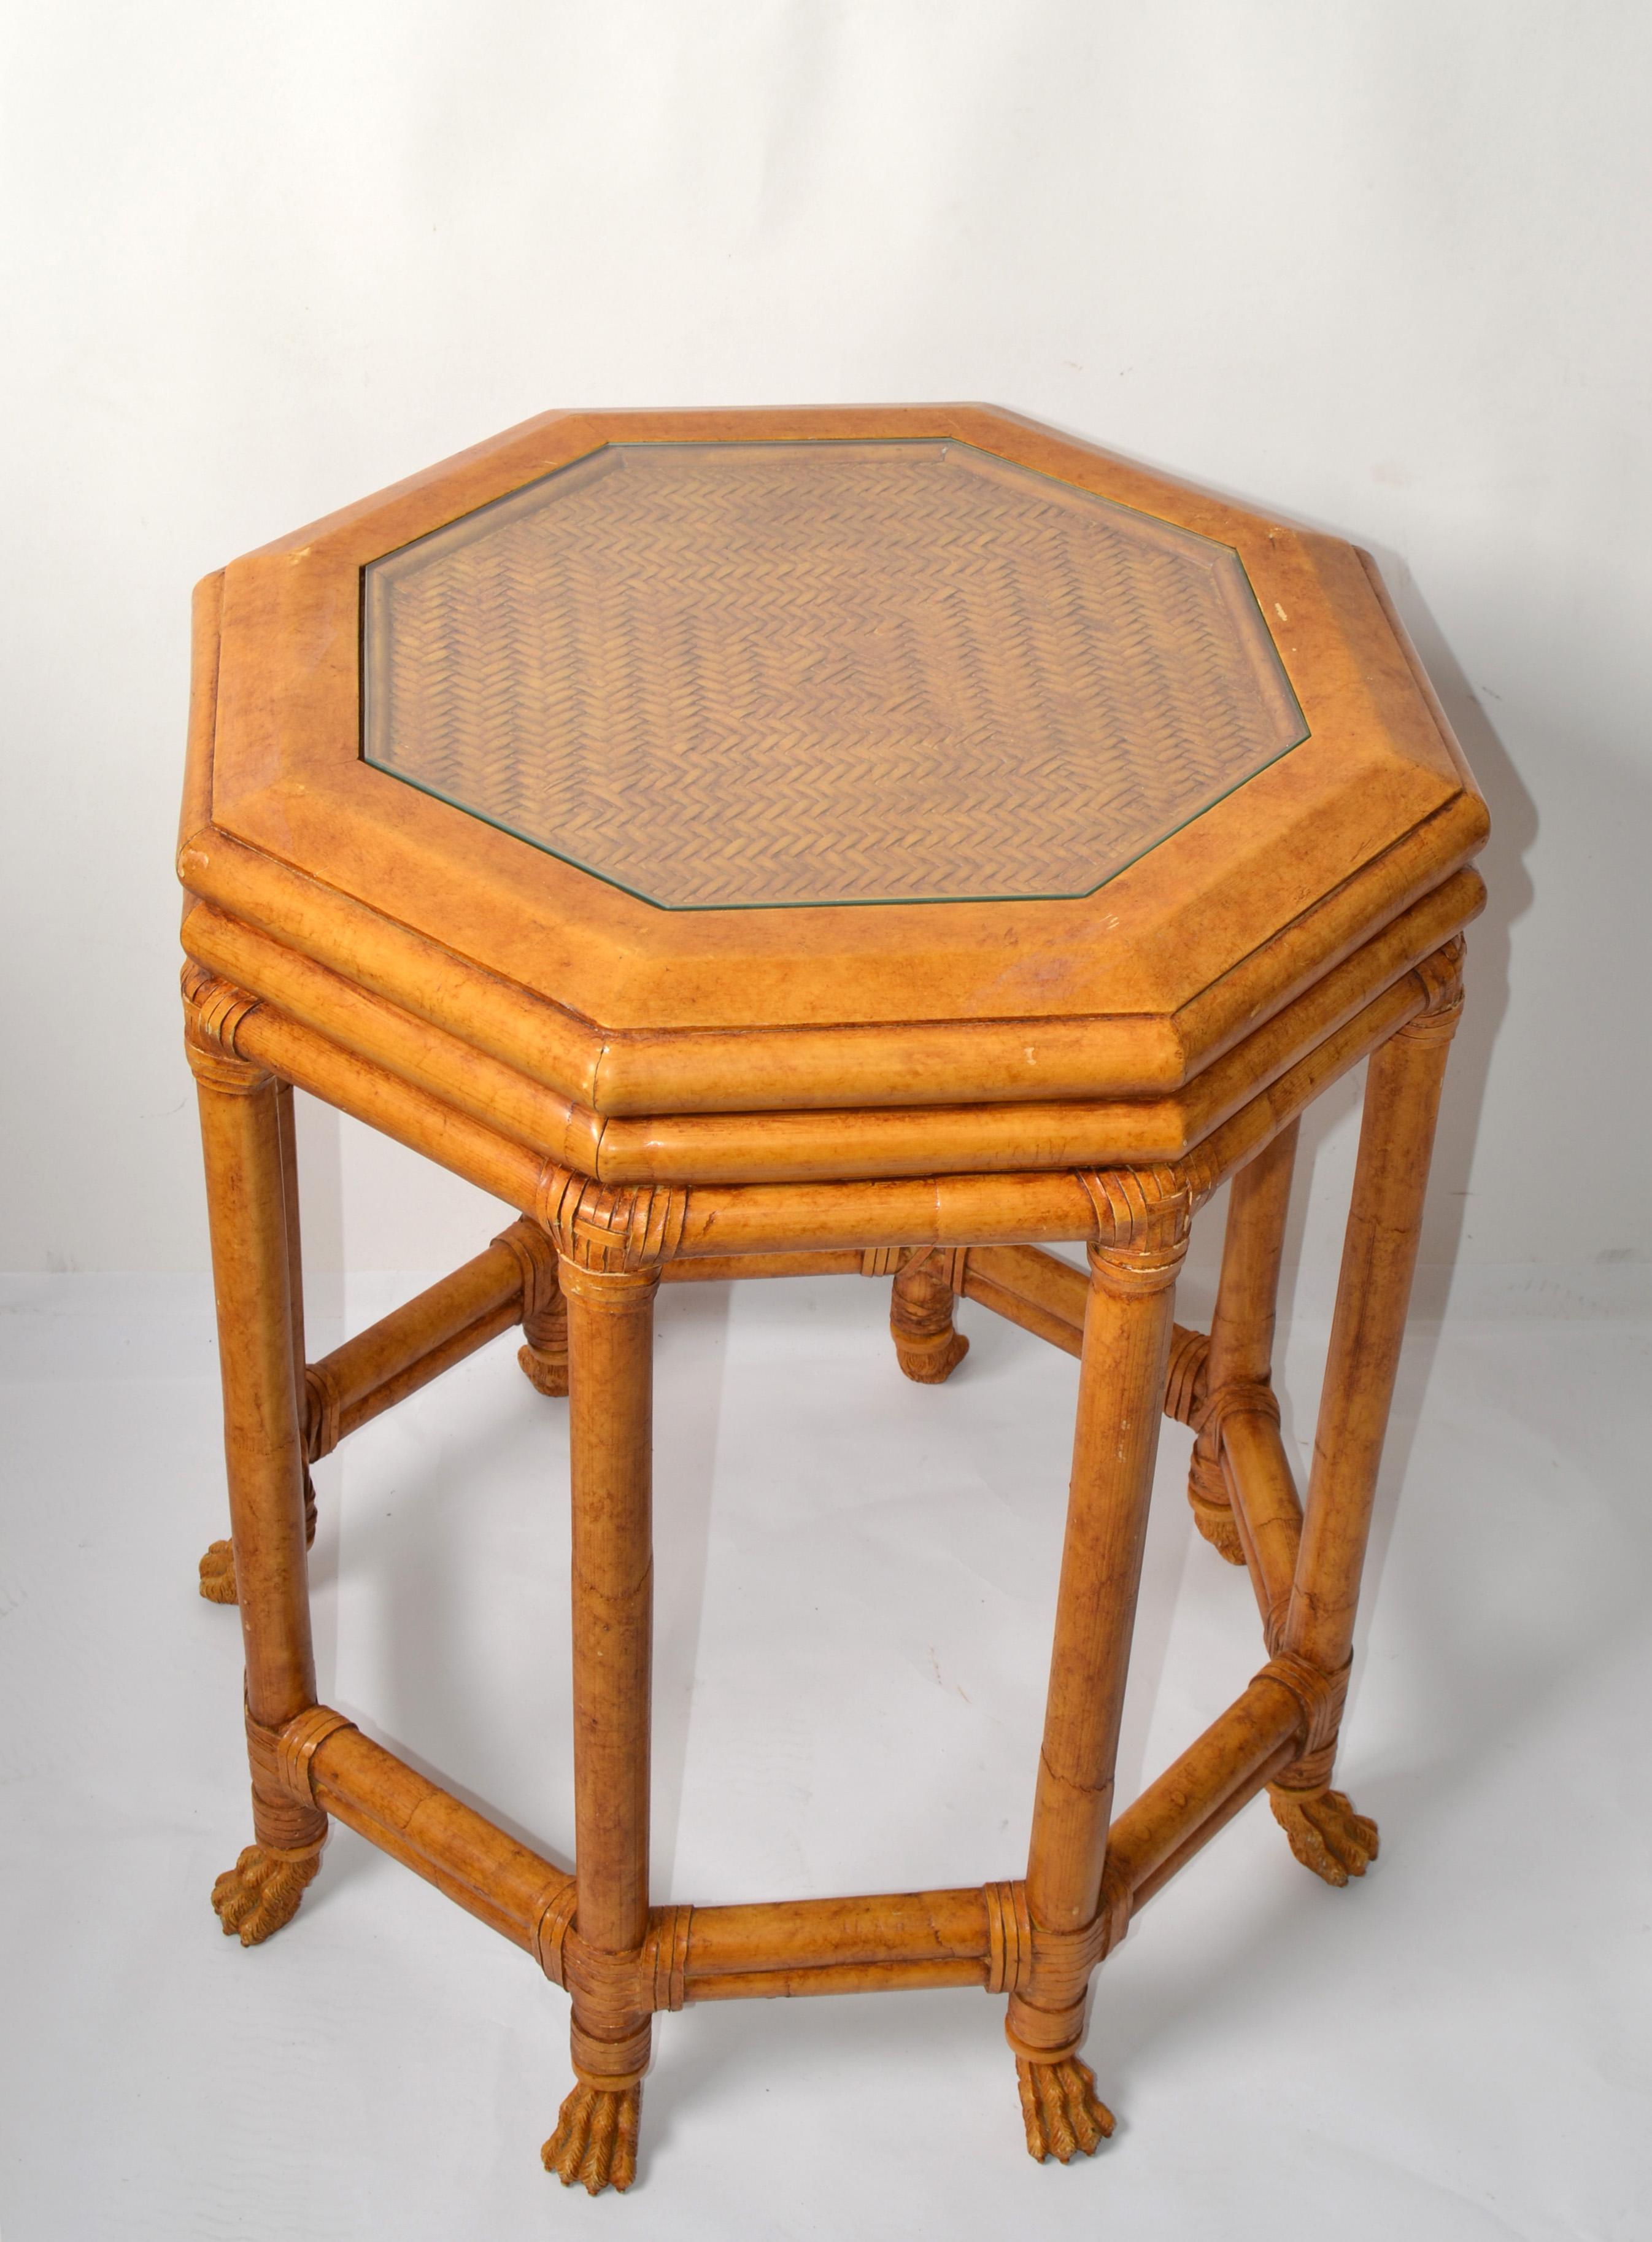 Hand-Carved McGuire Style Octagonal Bamboo Burl Veneer Leather Bindings Glass Accent Table  For Sale